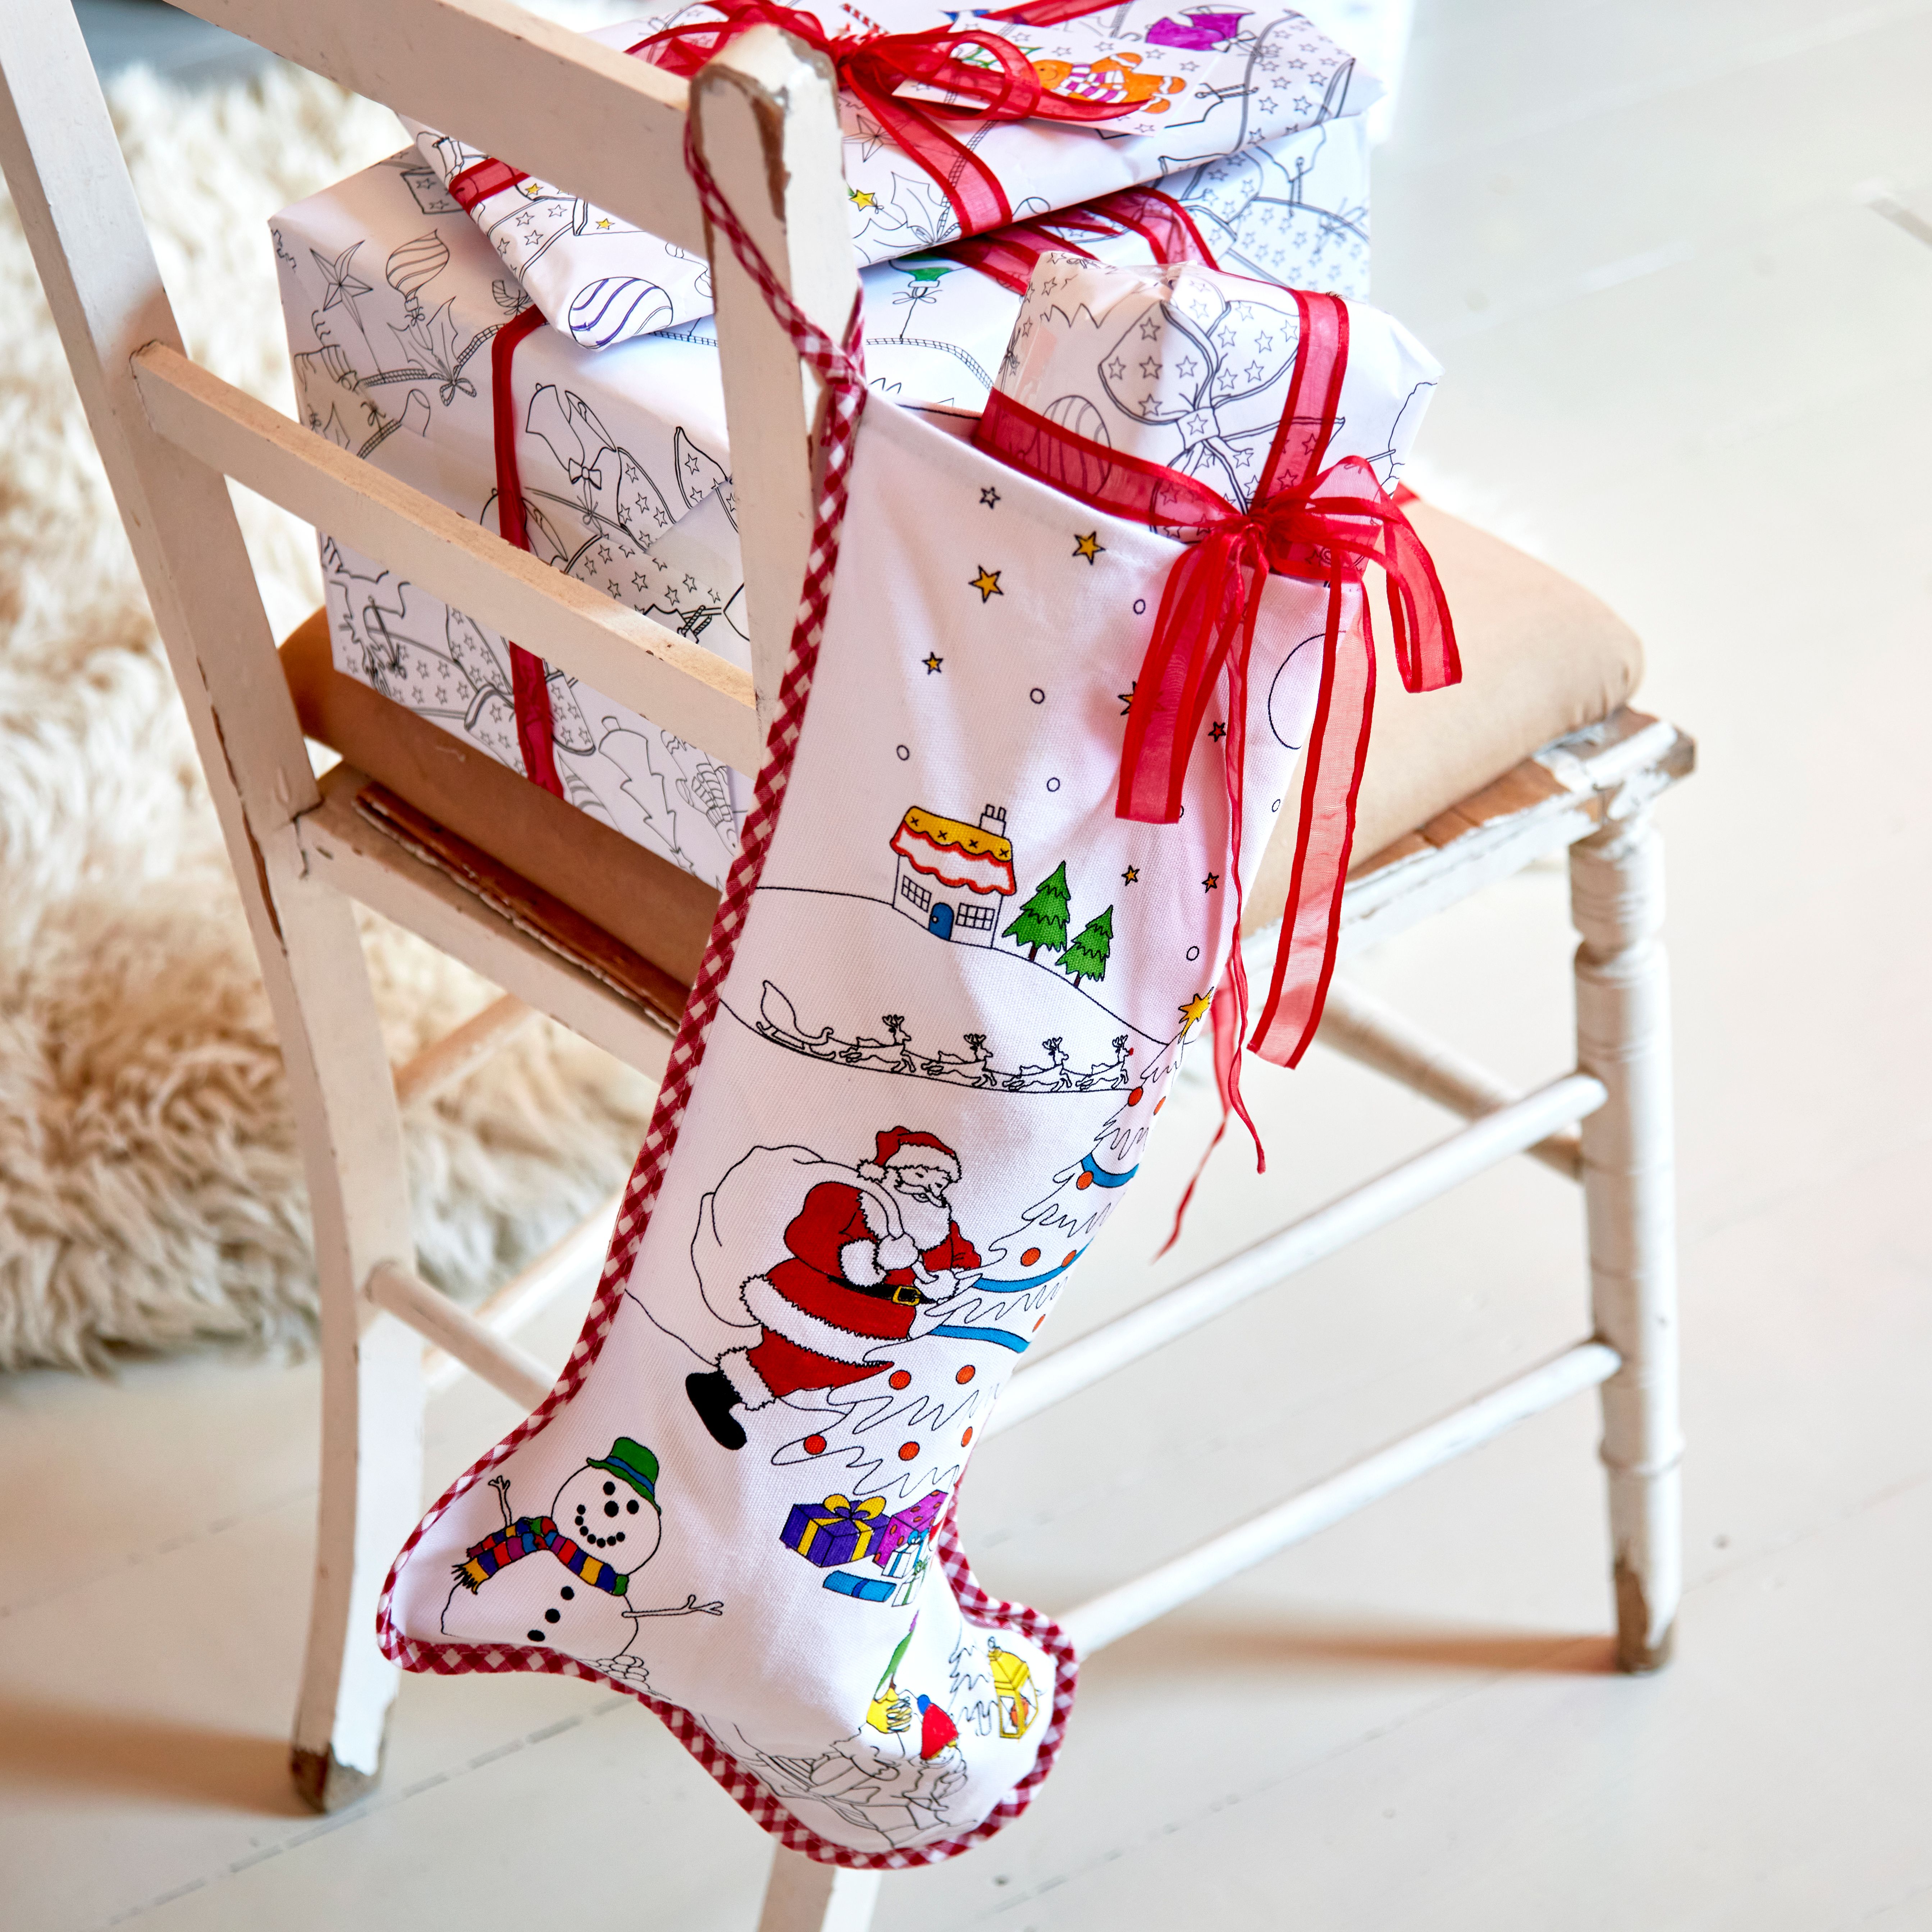 colour-in Christmas stocking